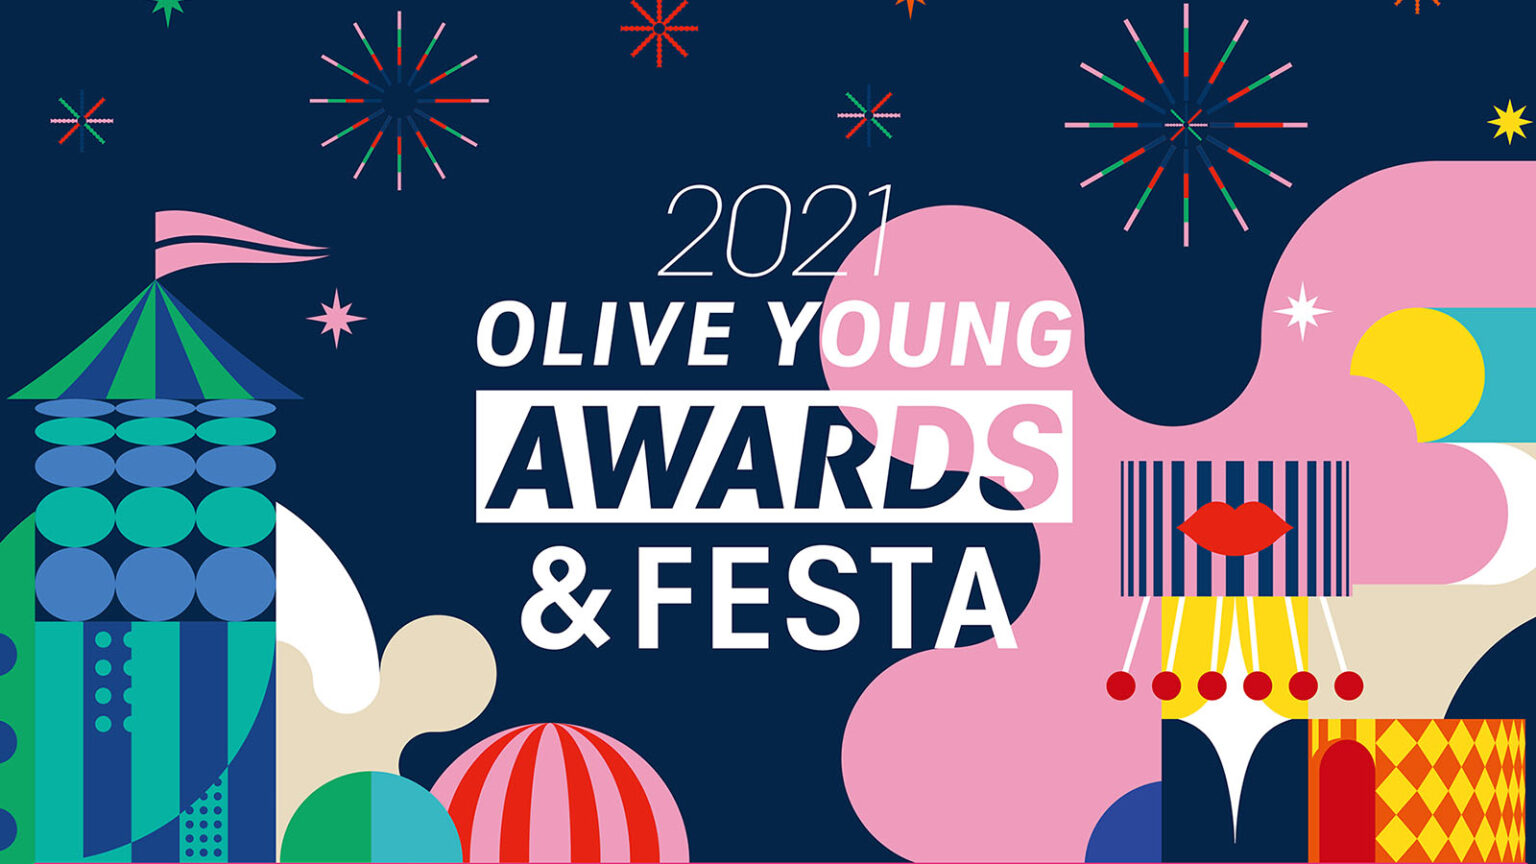 Olive Young Awards 2021 The Monodist By Odile Monod